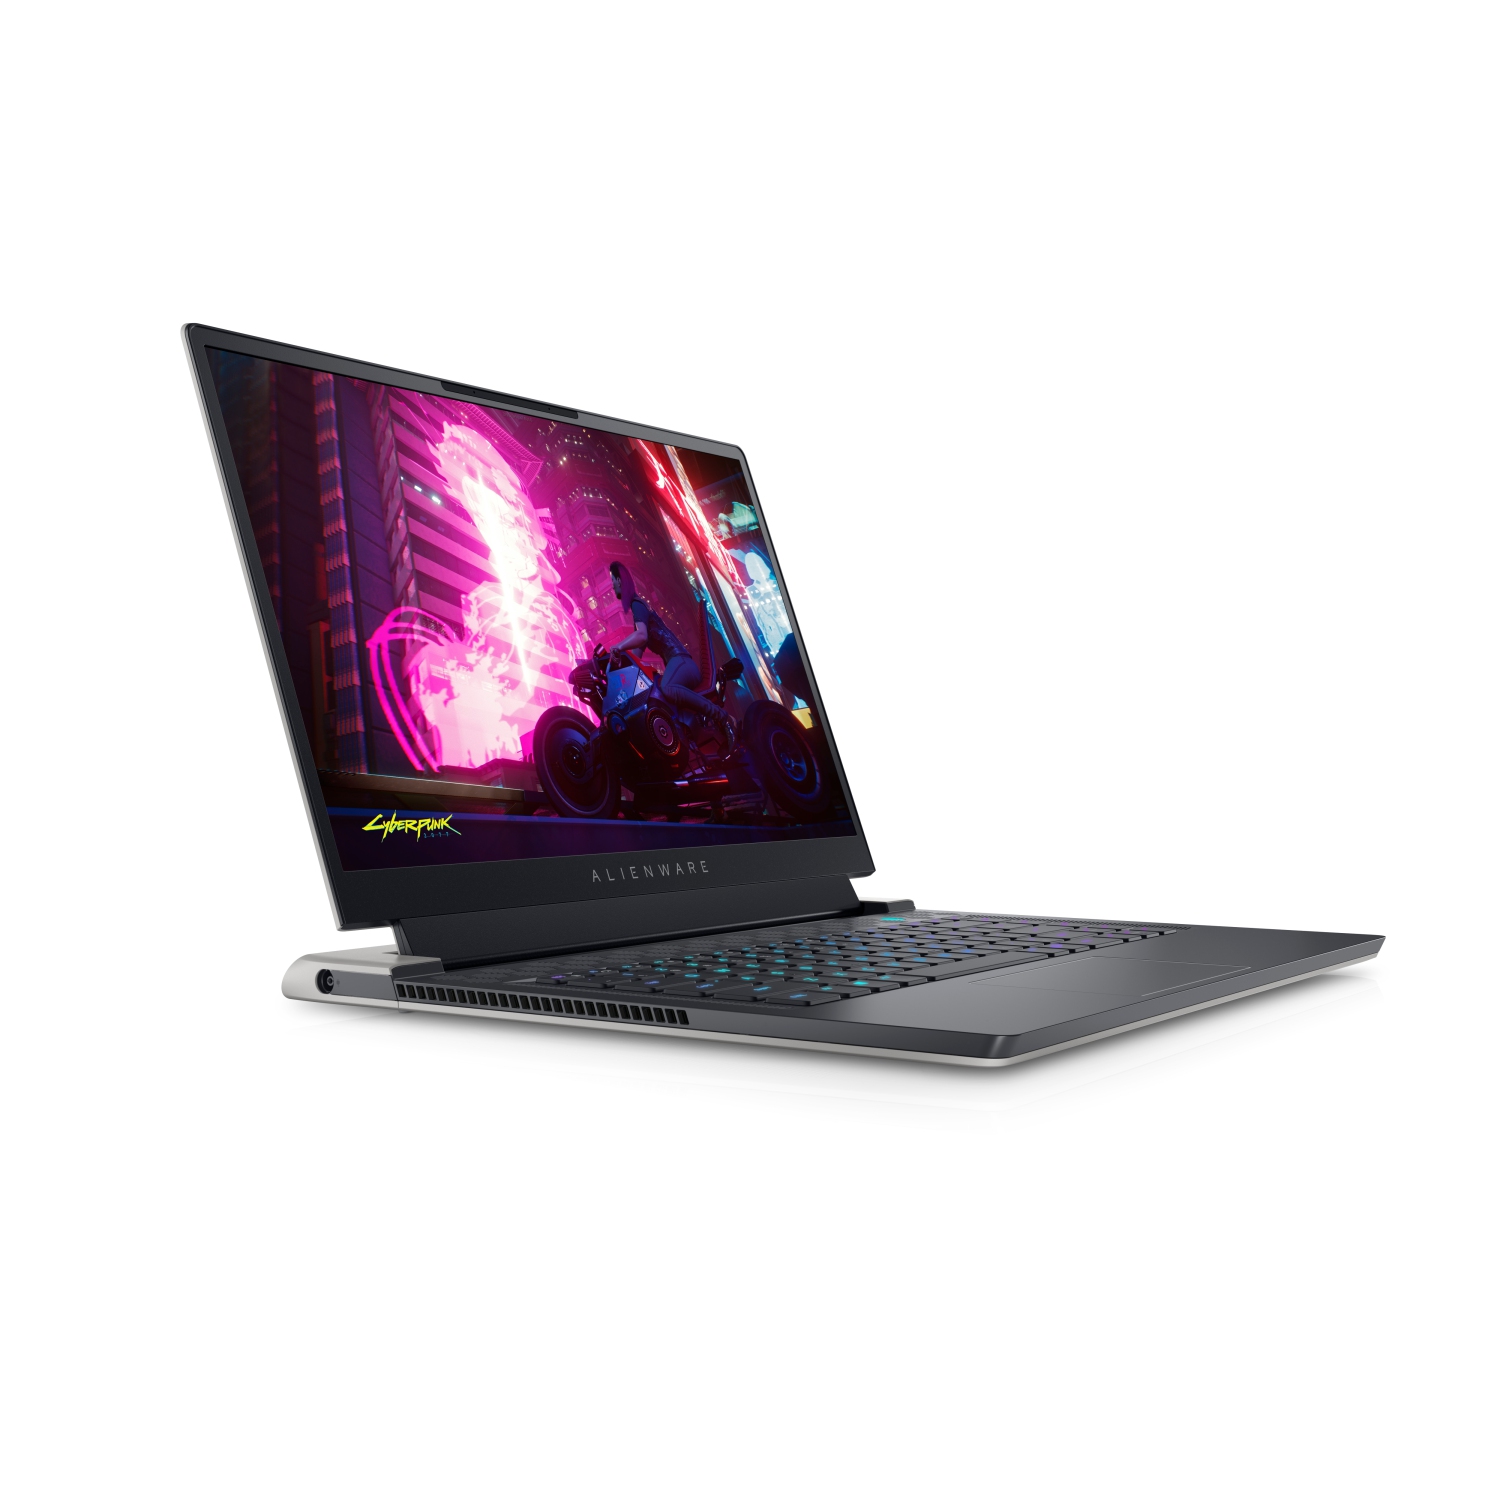 Refurbished (Excellent) - Dell Alienware X15 R1 Gaming Laptop (2021), 15.6" QHD, Core i7, 1TB SSD, 16GB RAM, RTX 3070, 8 Cores @ 4.6 GHz, 11th Gen CPU Certified